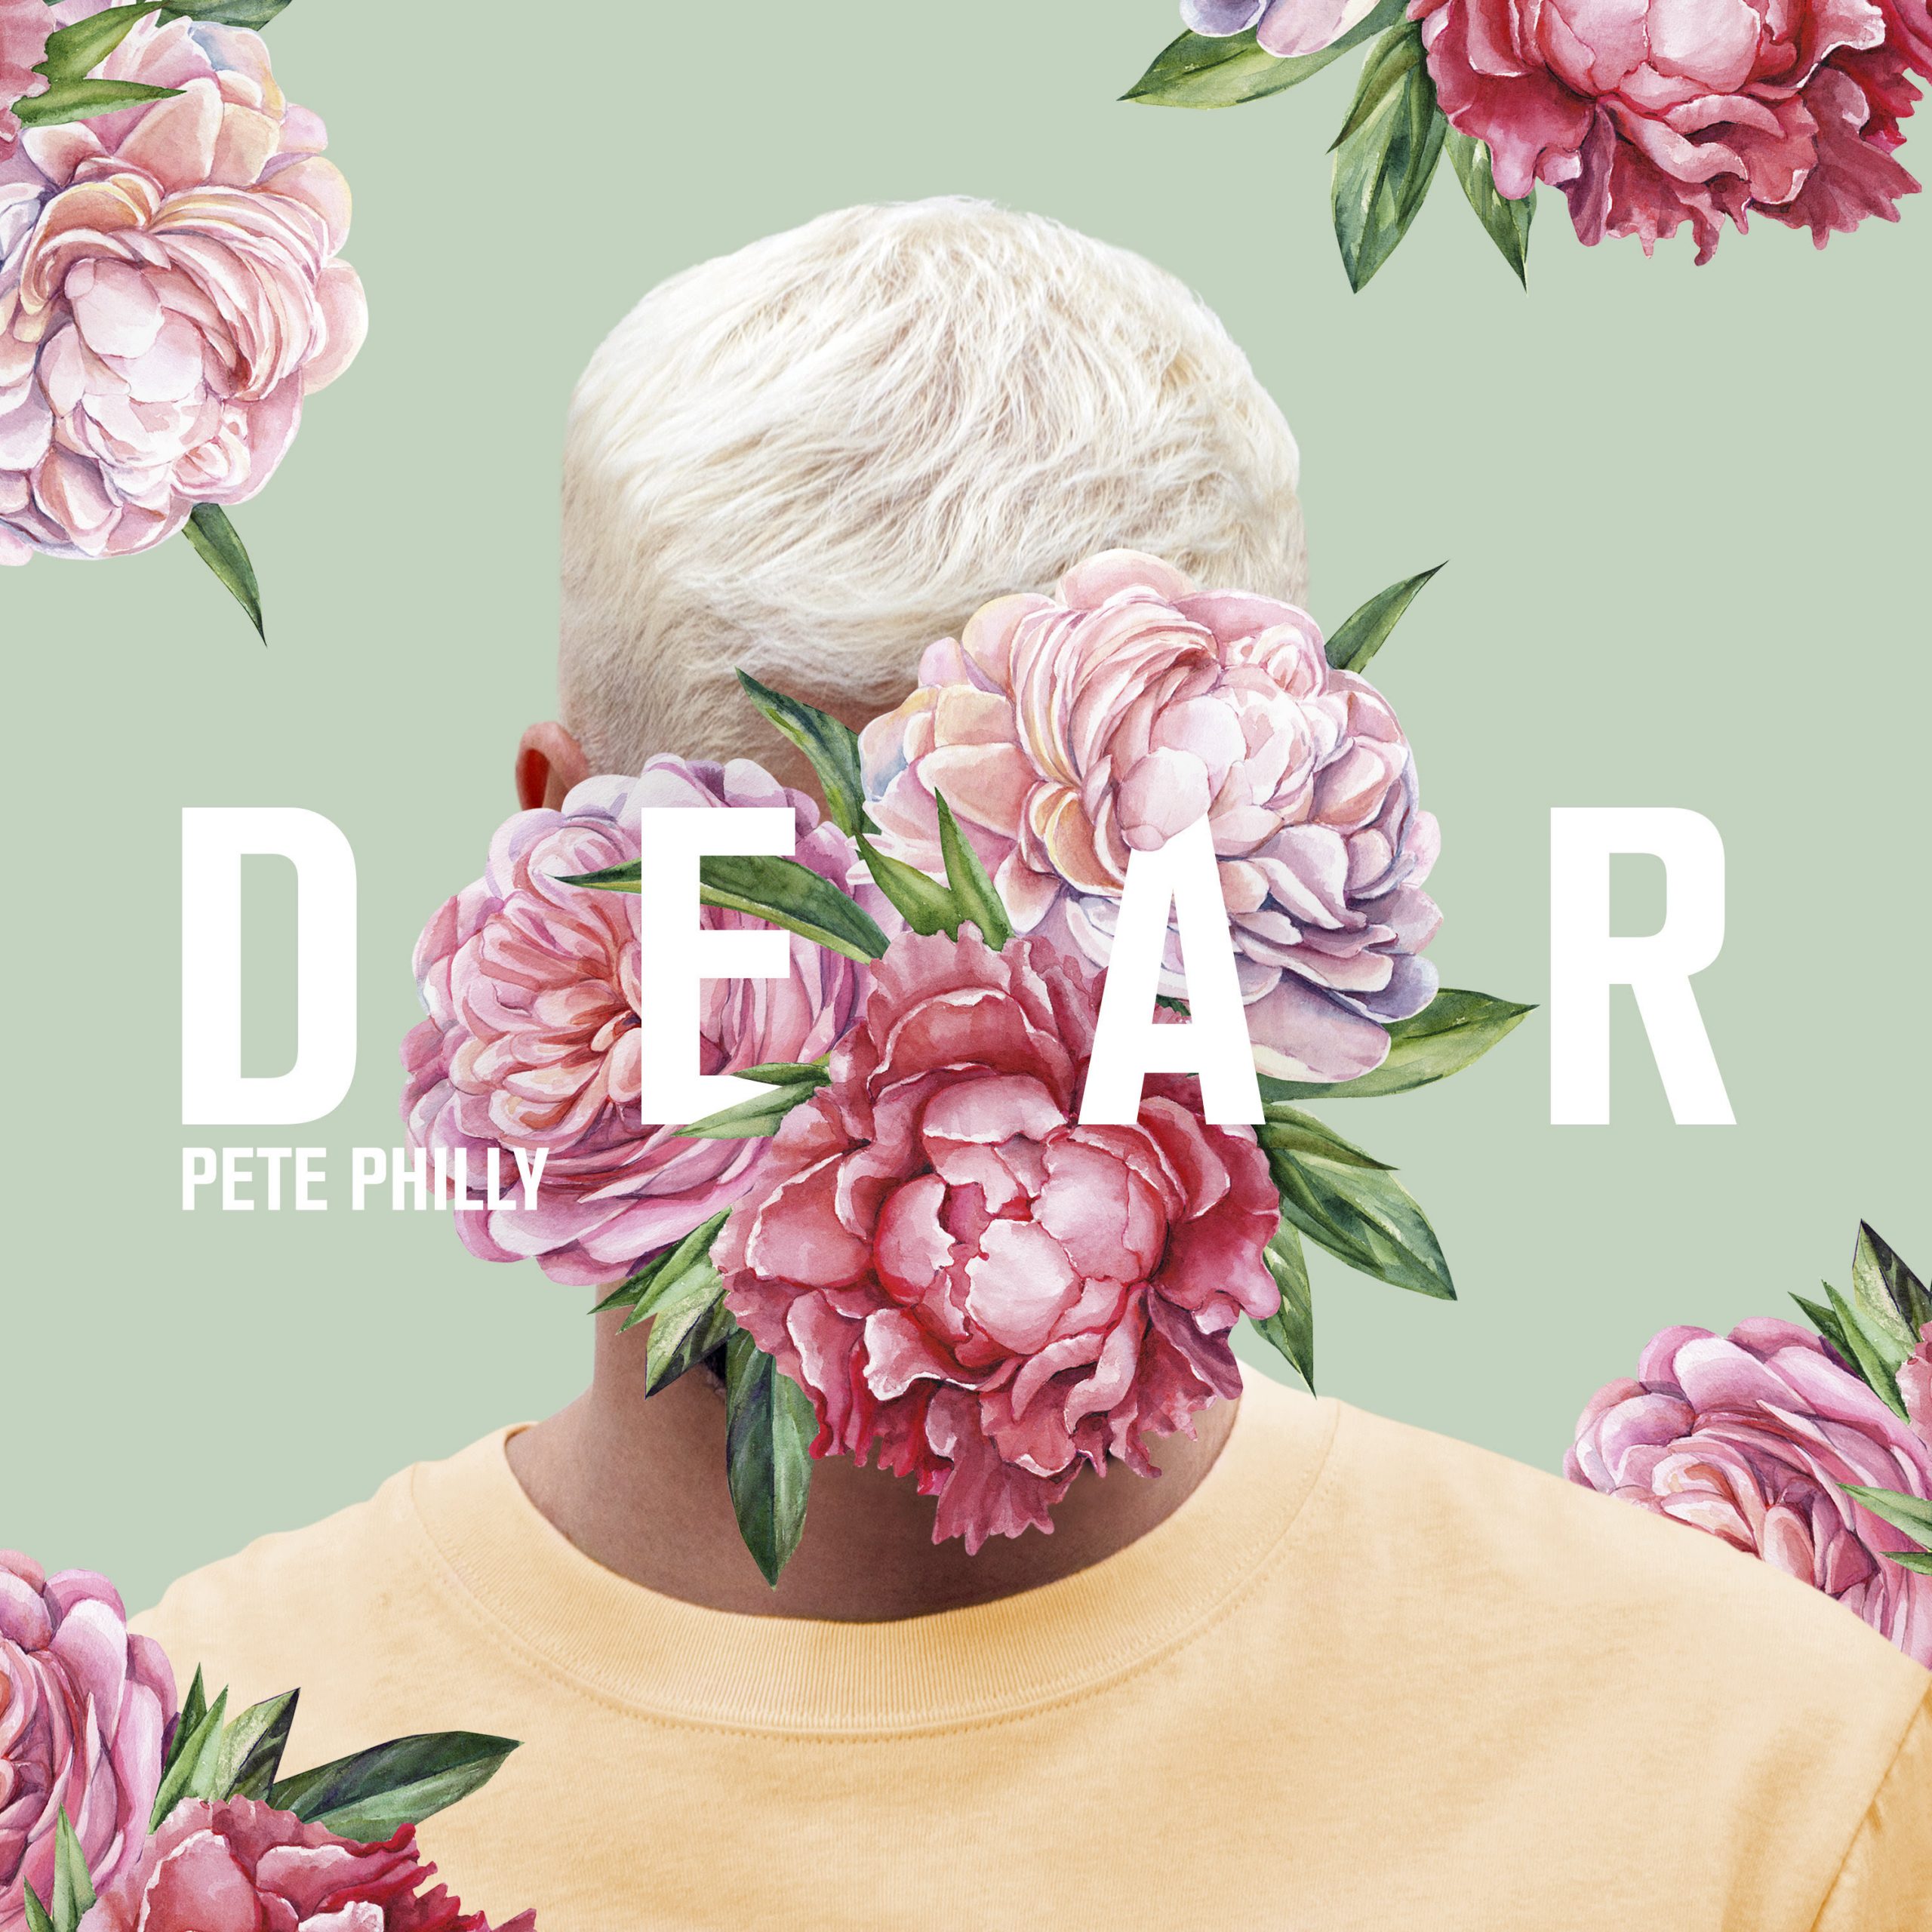 Pete Philly's cover art for Dear